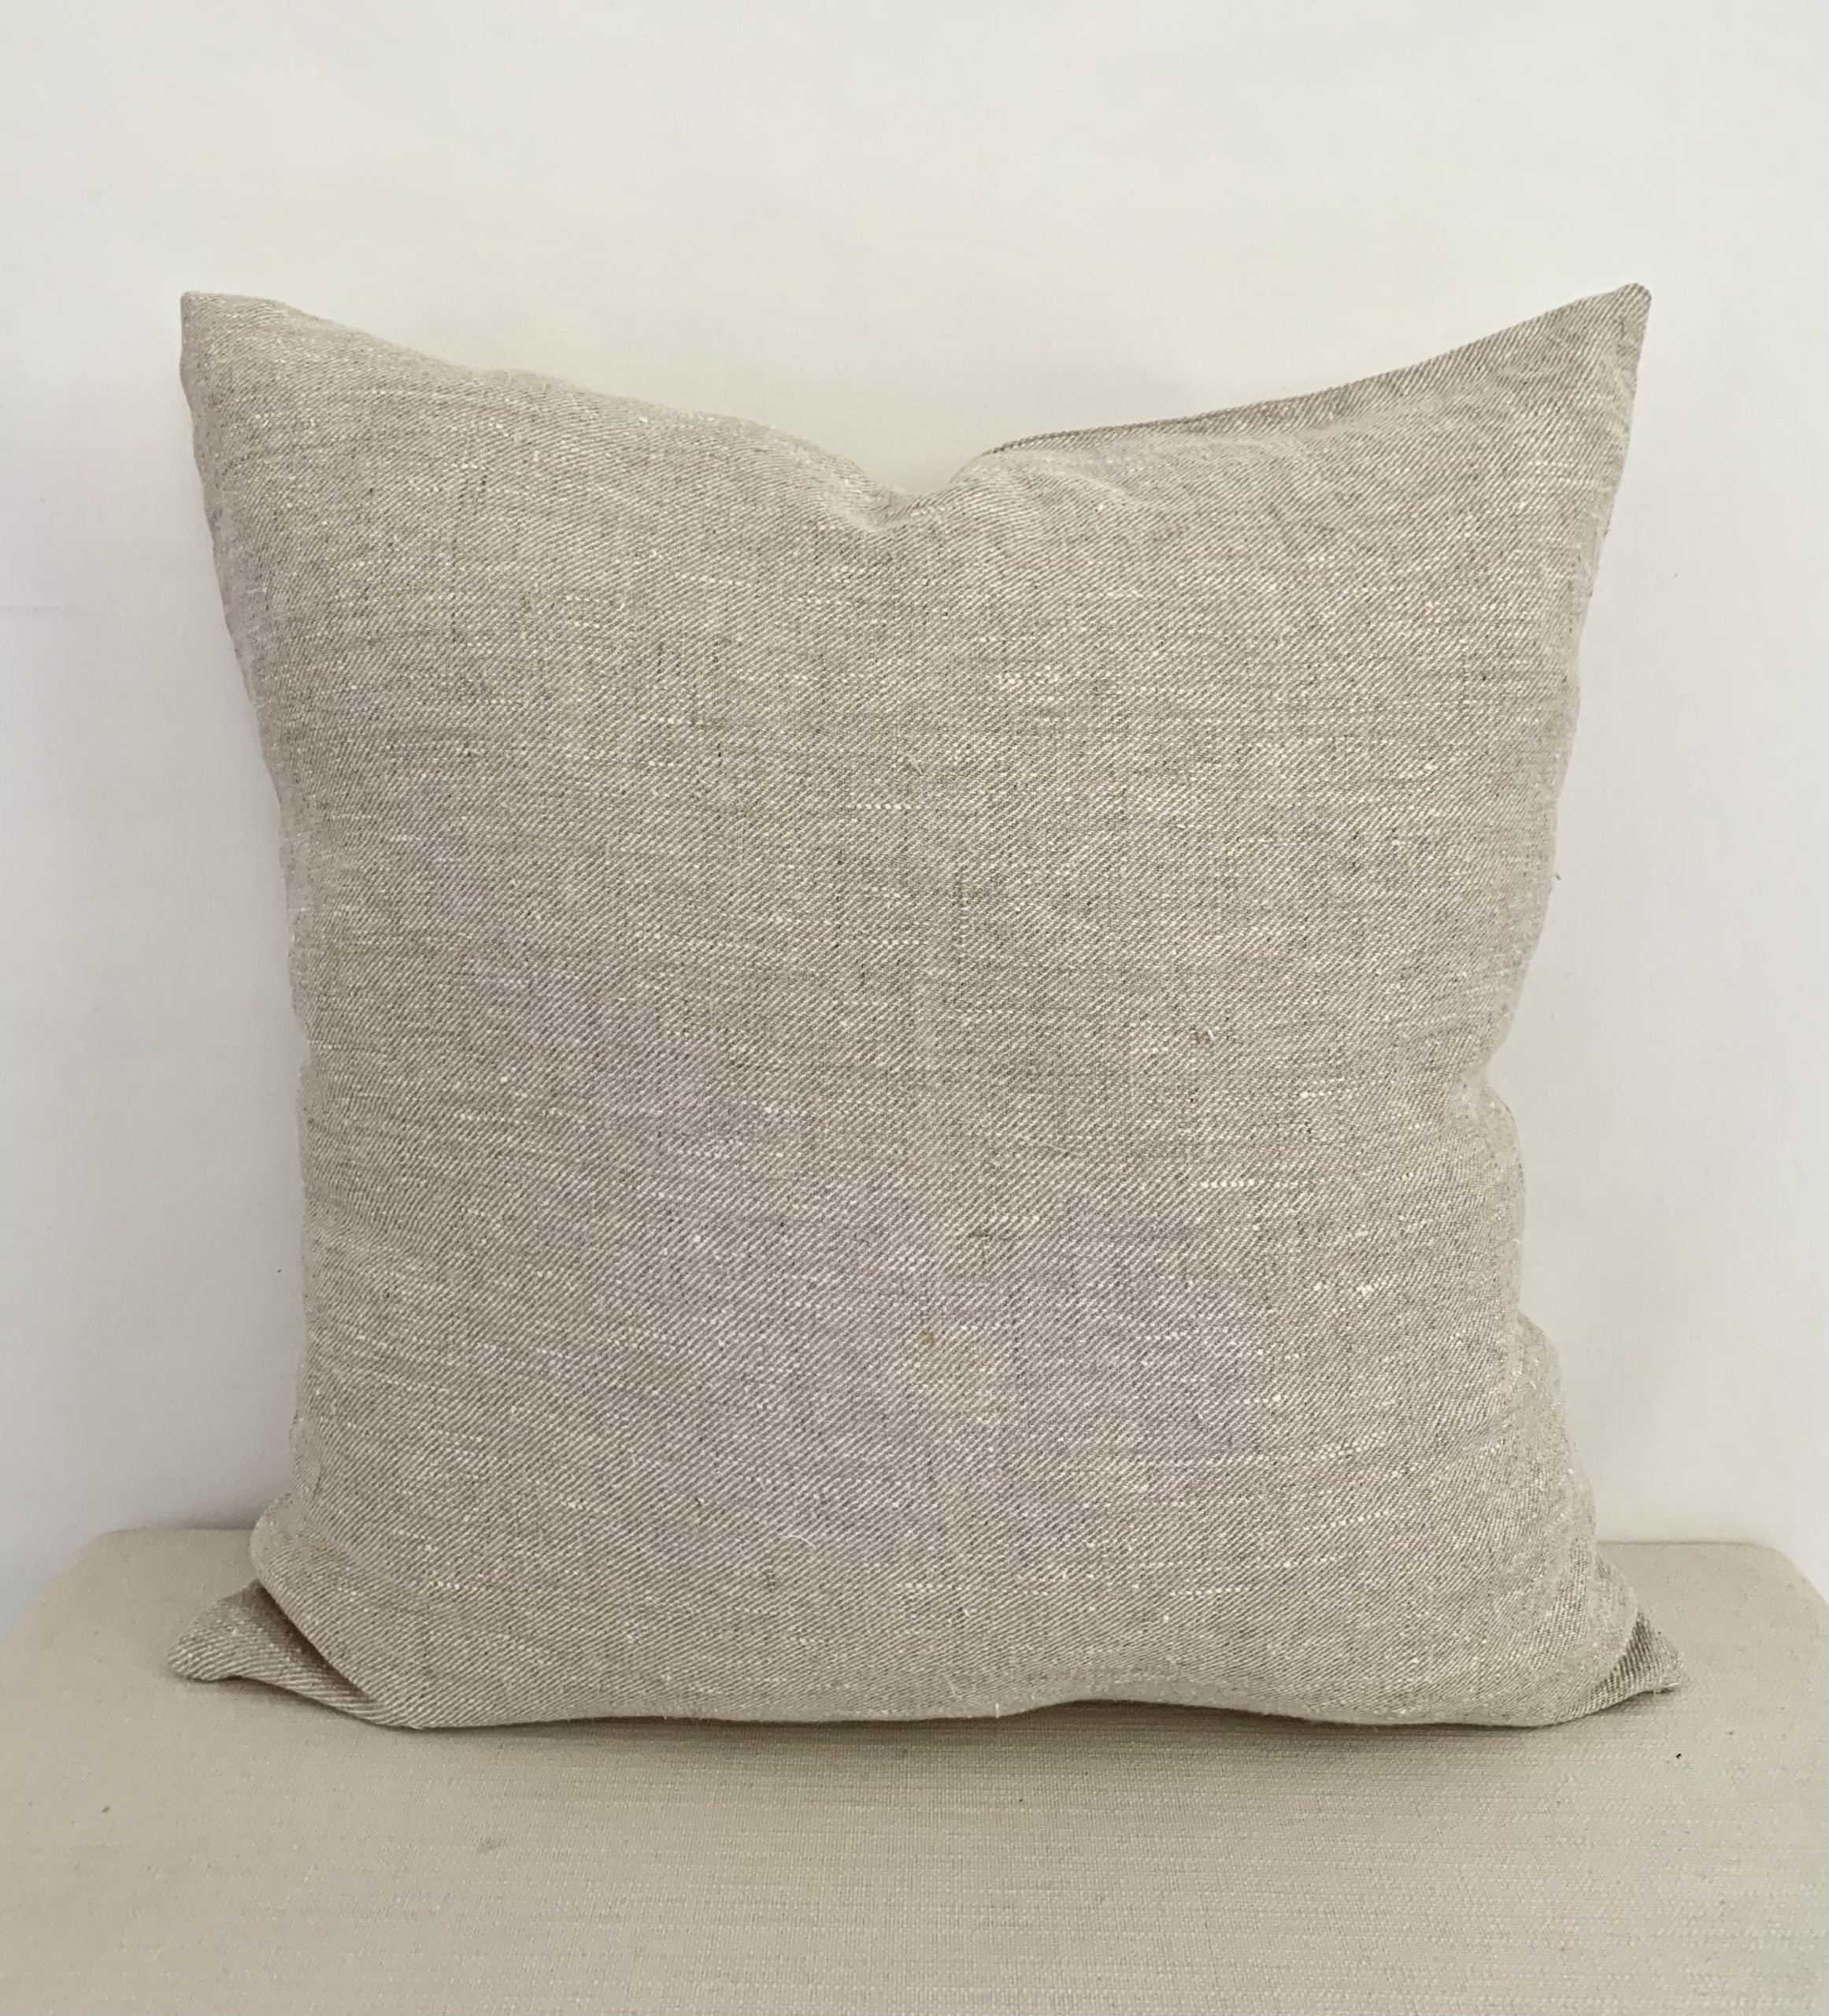 Rustic Linen Pillow Covers, 22x22 NikkiDesigns